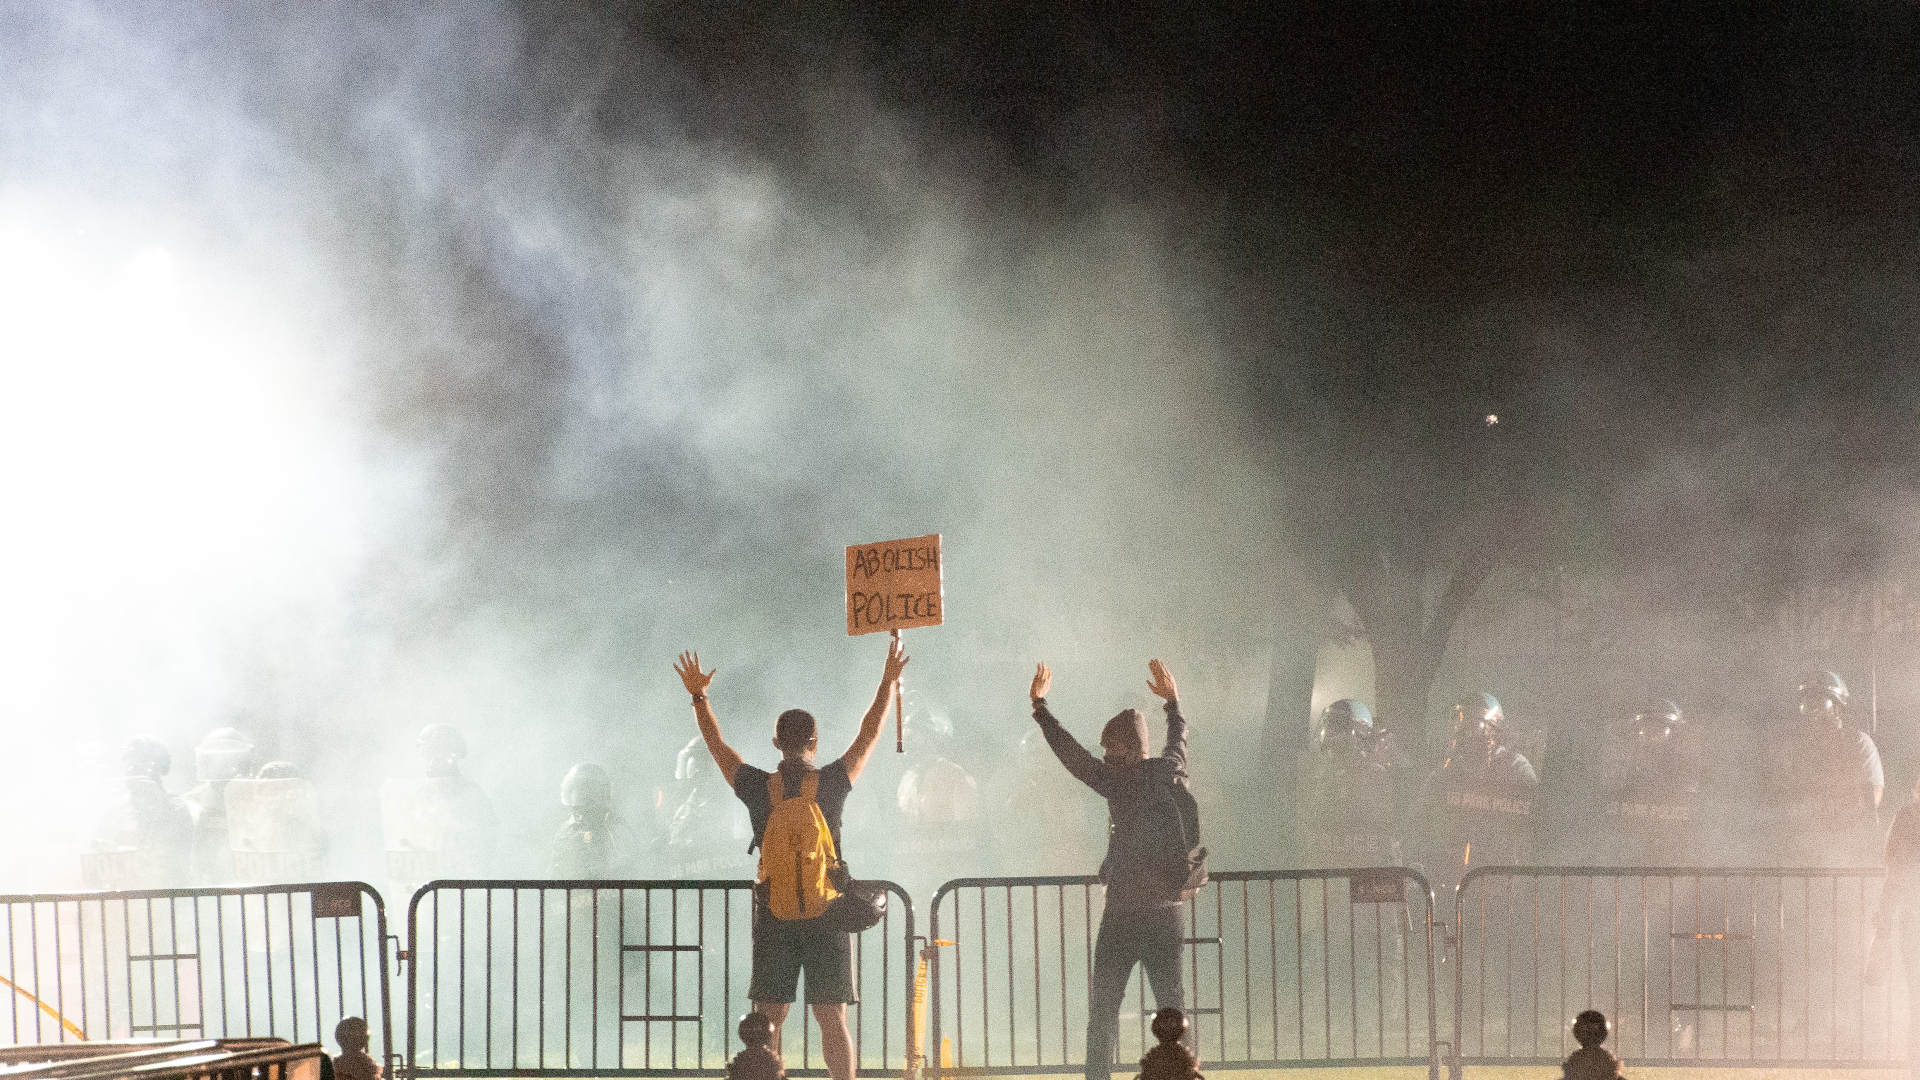 Two protesters hold up their hands in front of a line of police, with a cloud of tear gas wafting in front of them.